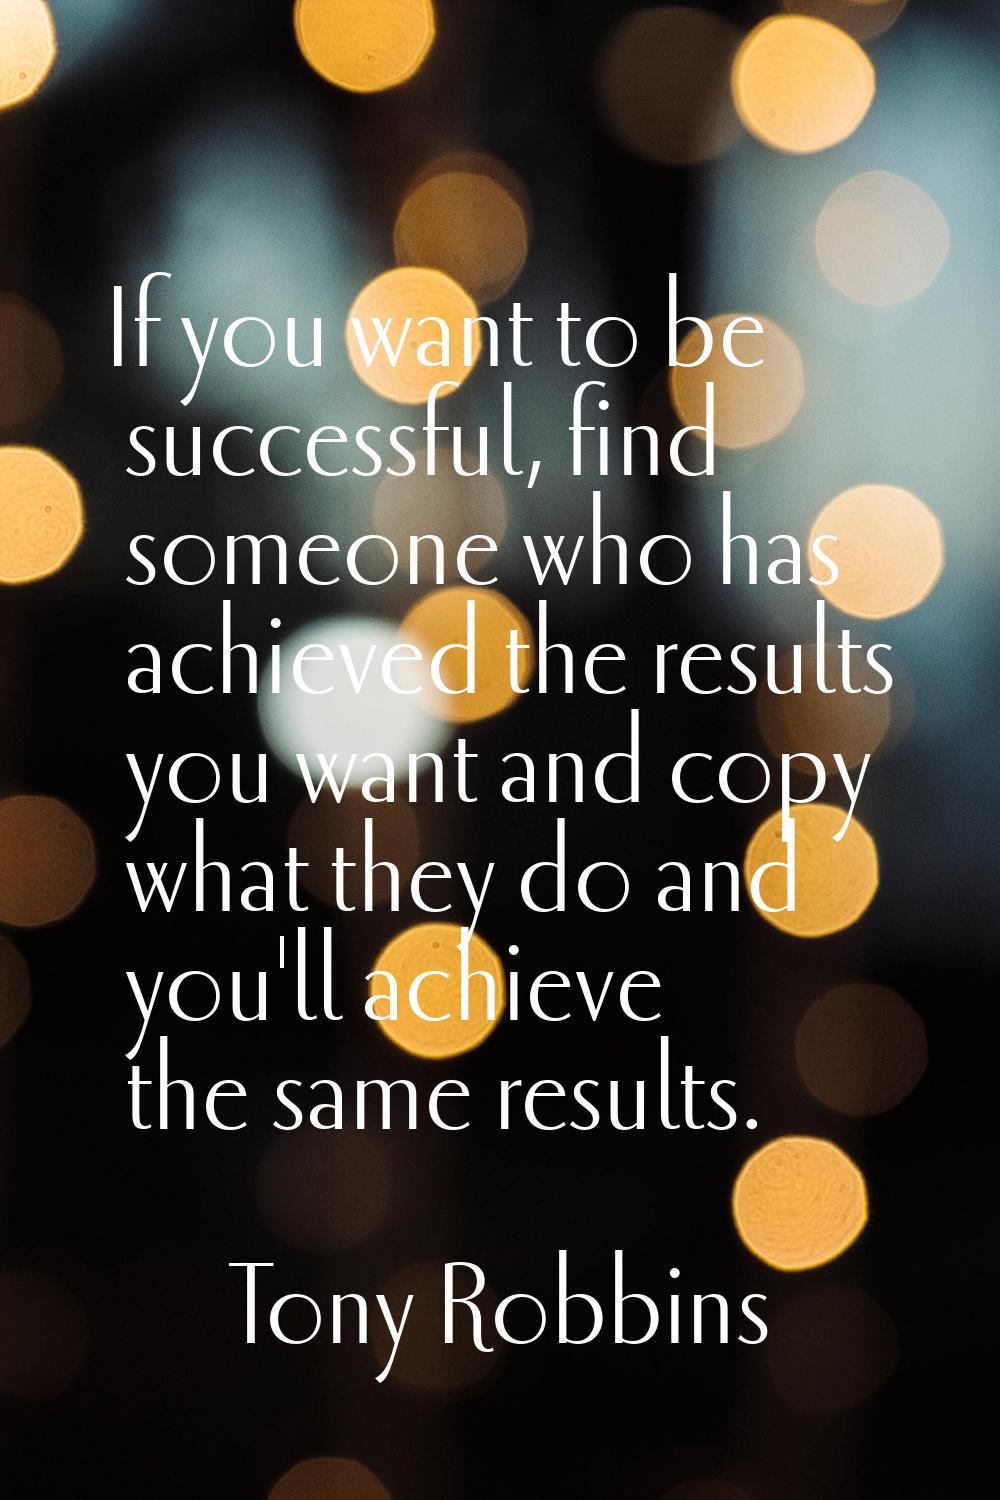 If you want to be successful, find someone who has achieved the results you want and copy what they